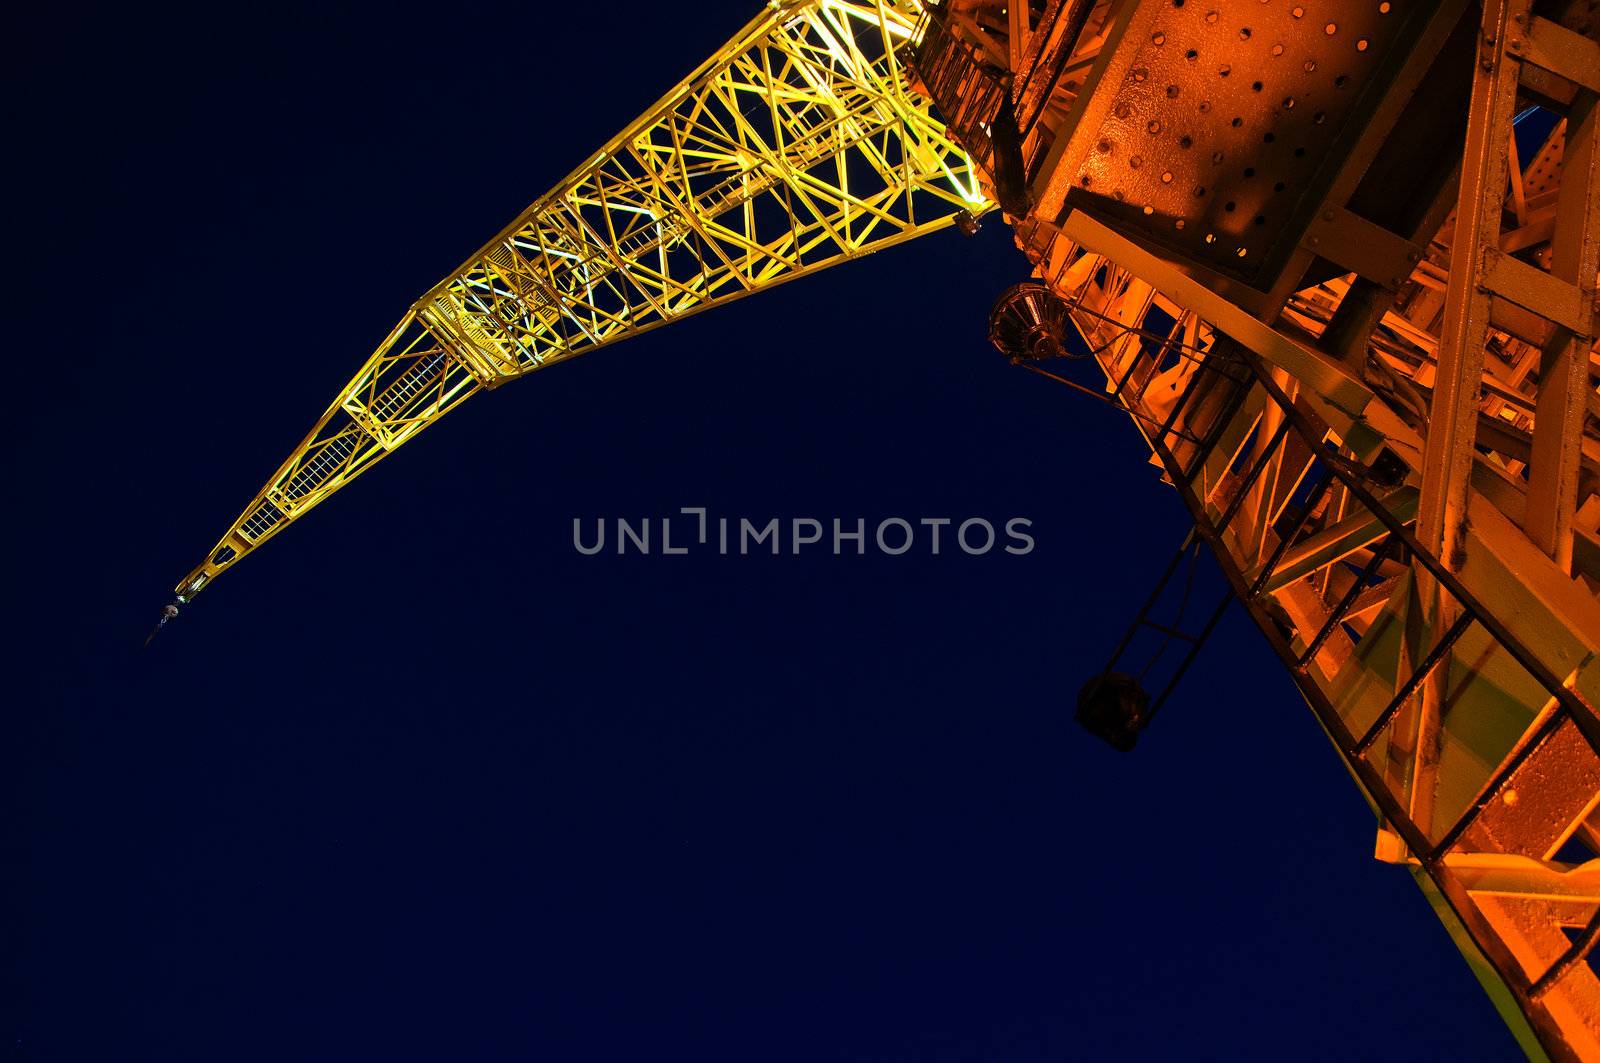 Colorful Crane at Night by jkraft5